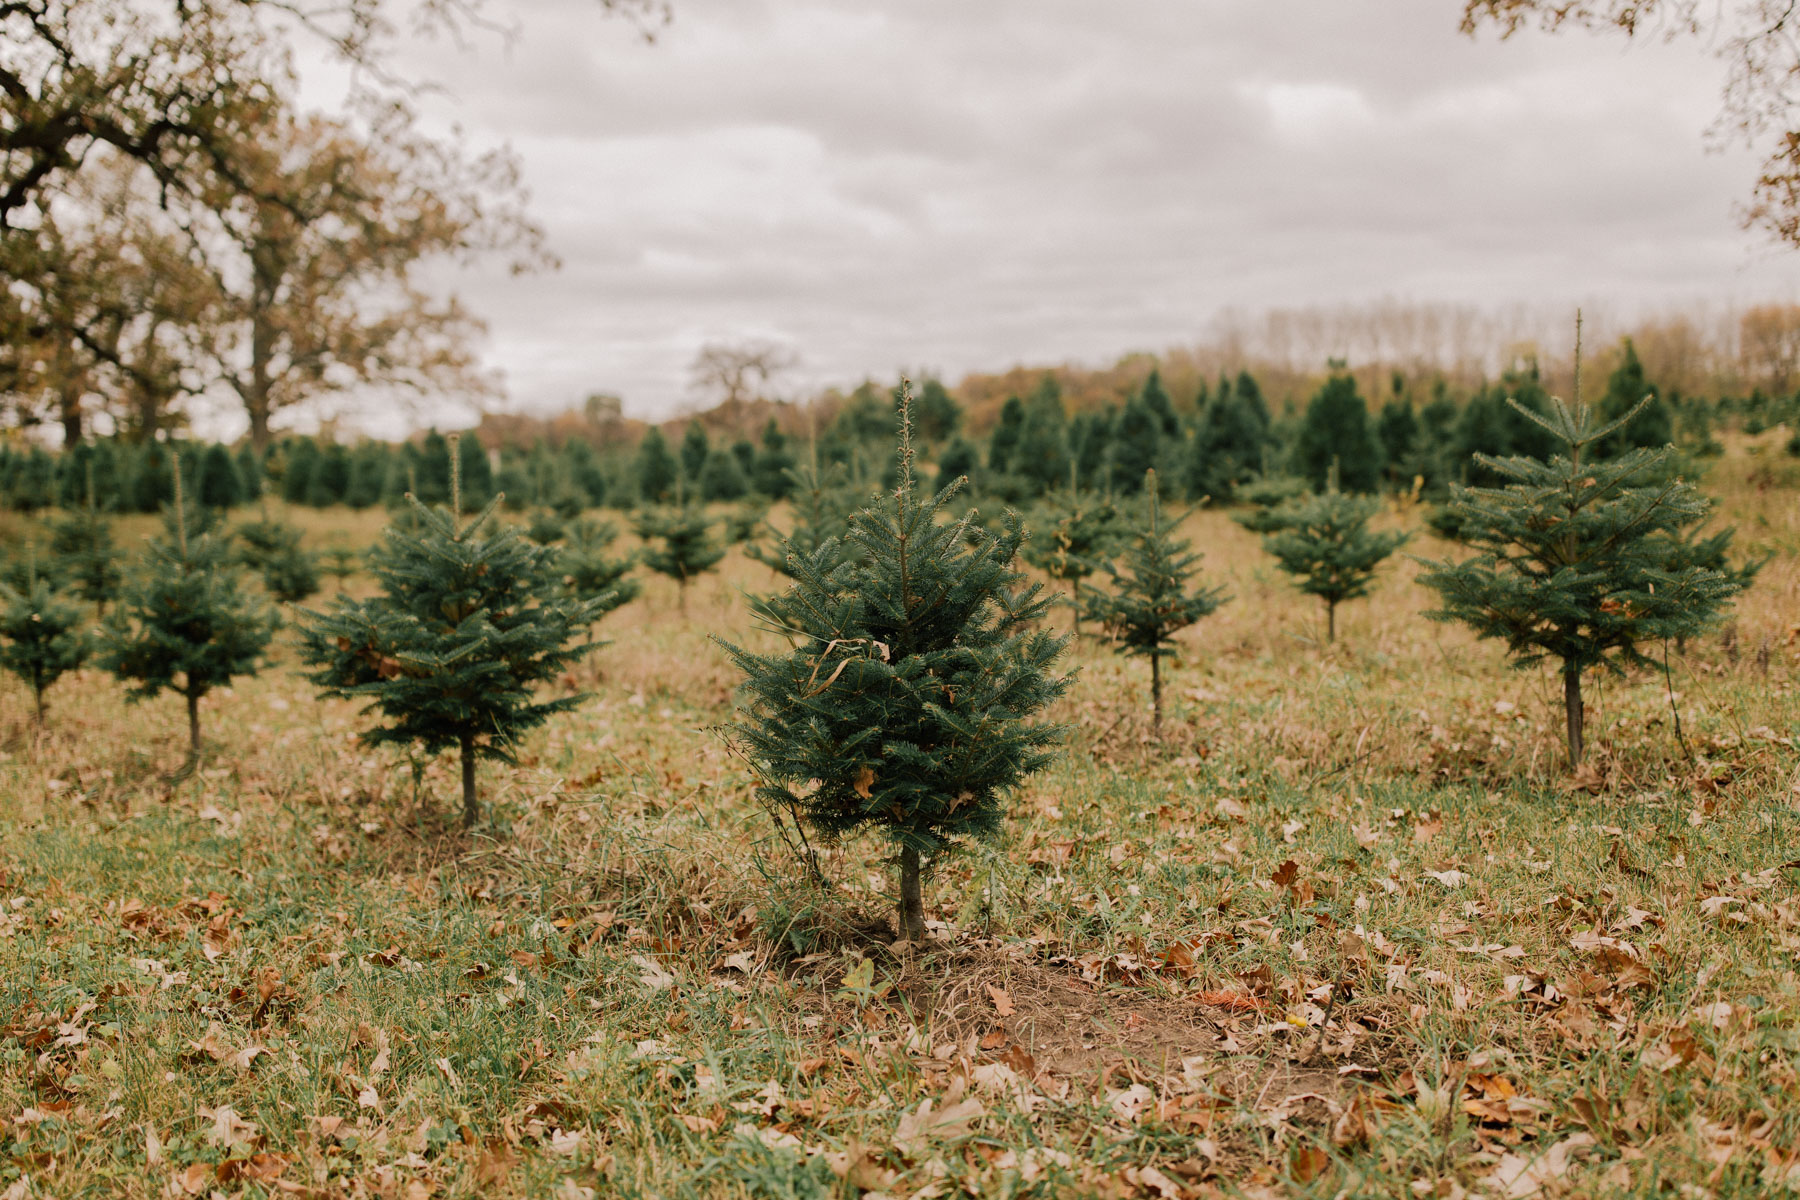 A Visit to the Christmas Tree Farm